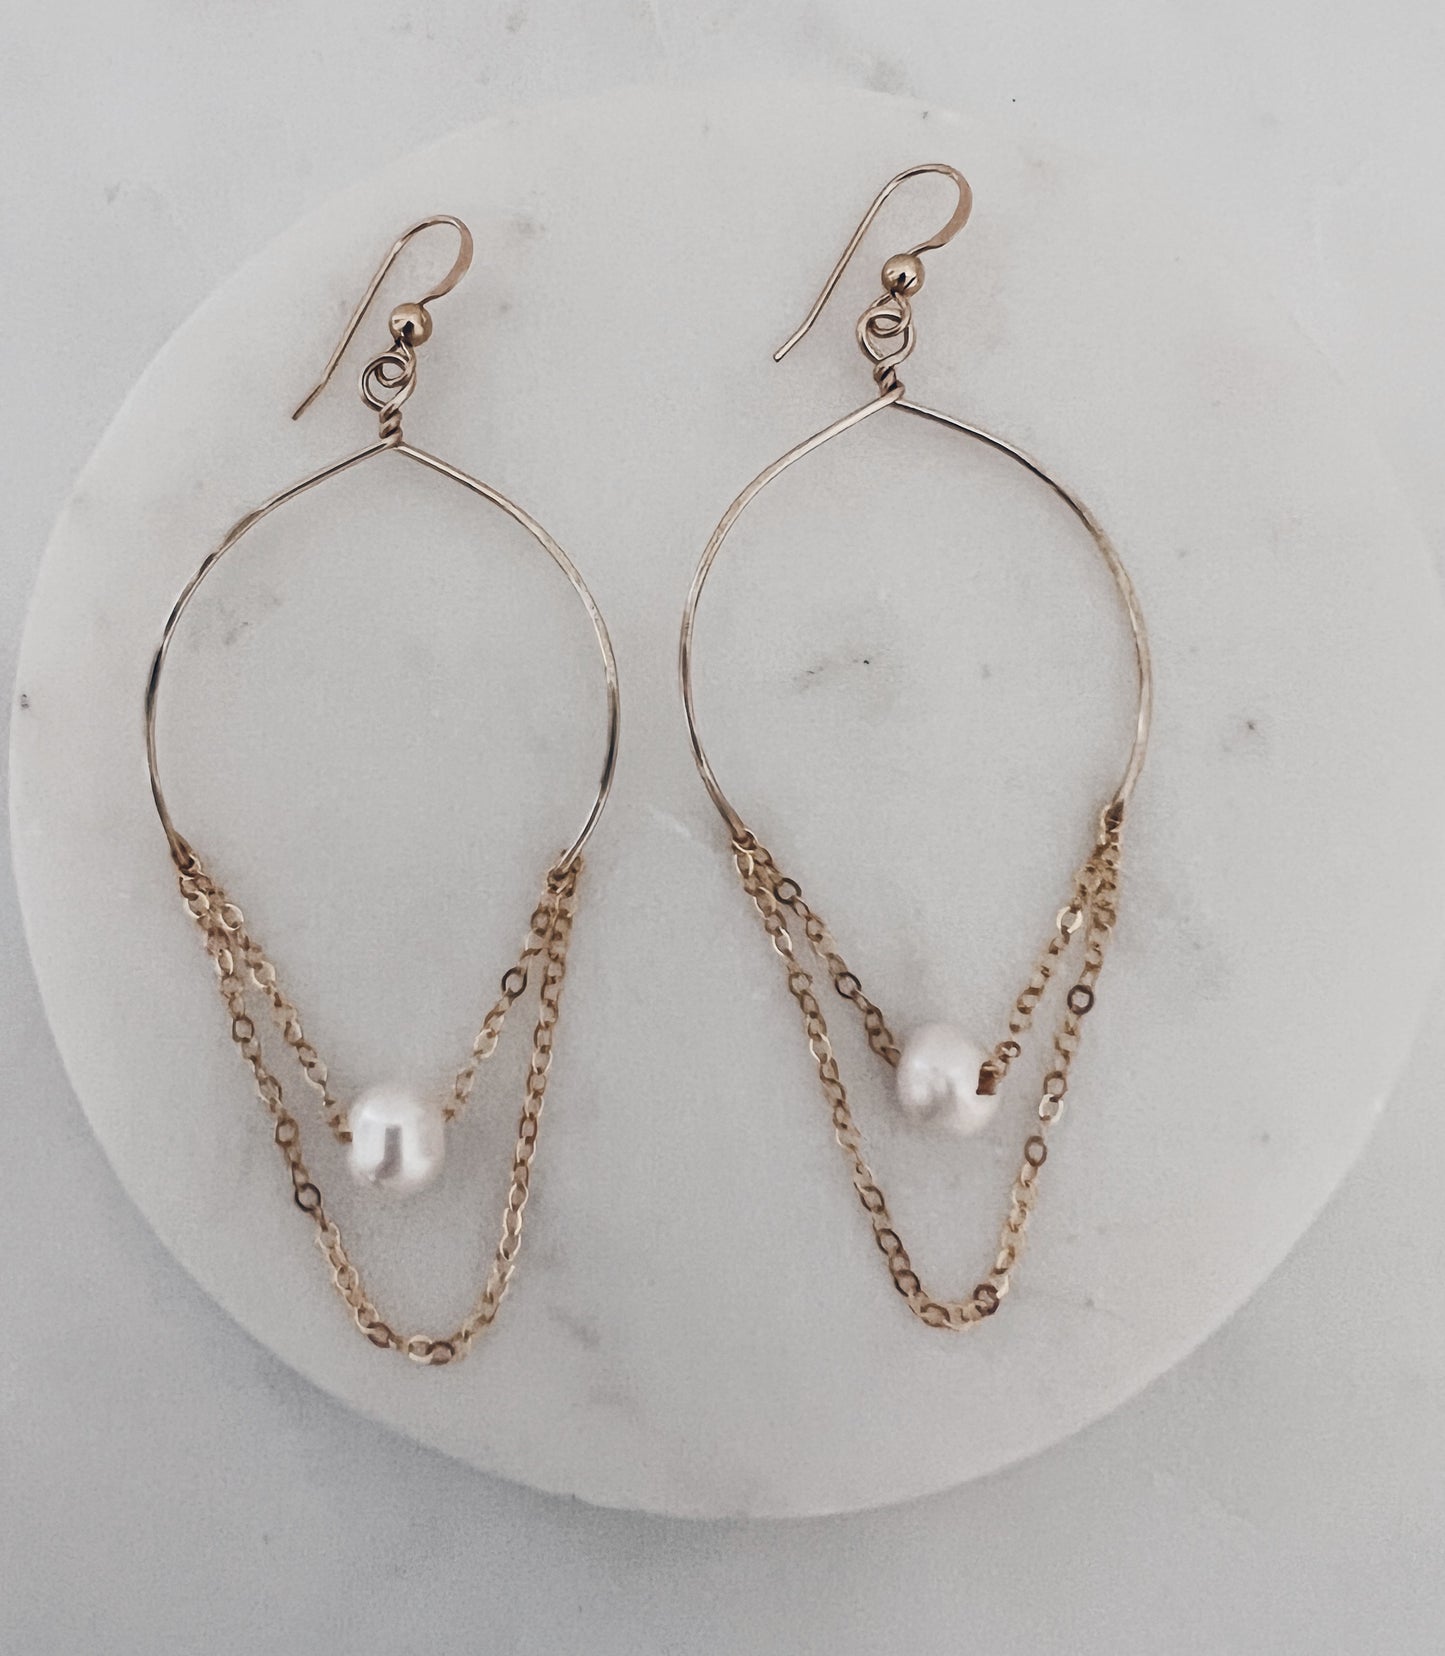 14k Gold Filled Arch Pearl & Chain Earrings + More Options